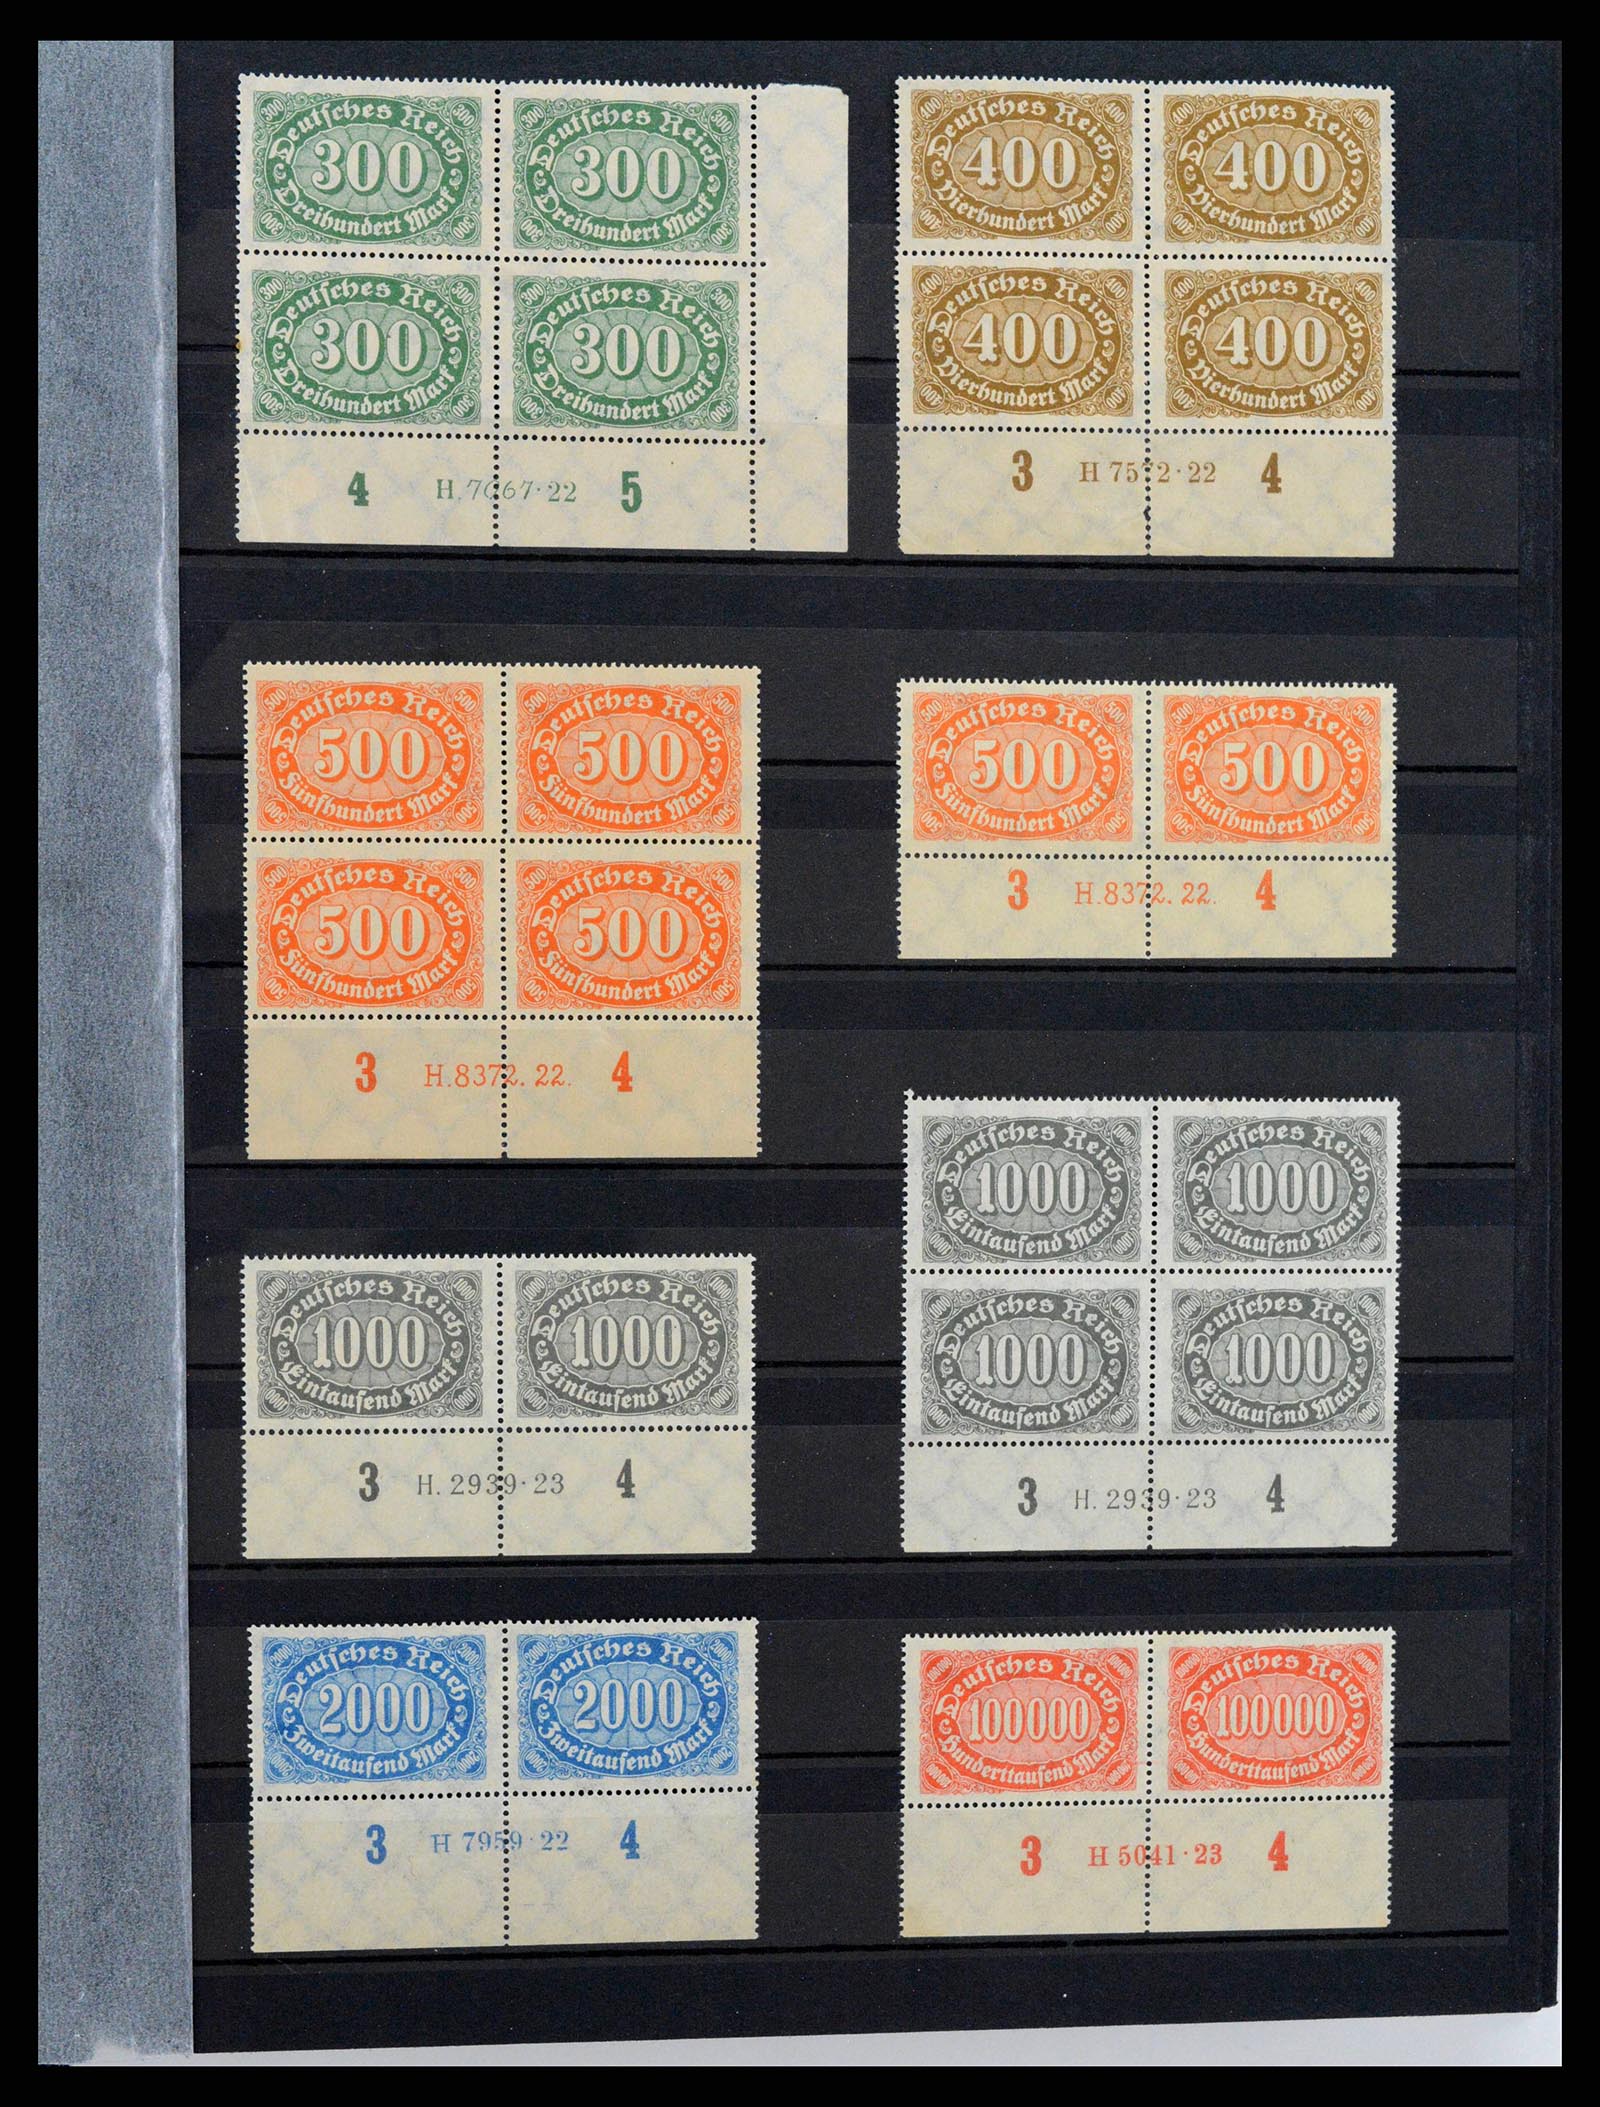 38417 0006 - Stamp collection 38417 German Reich infla 1922-1923.